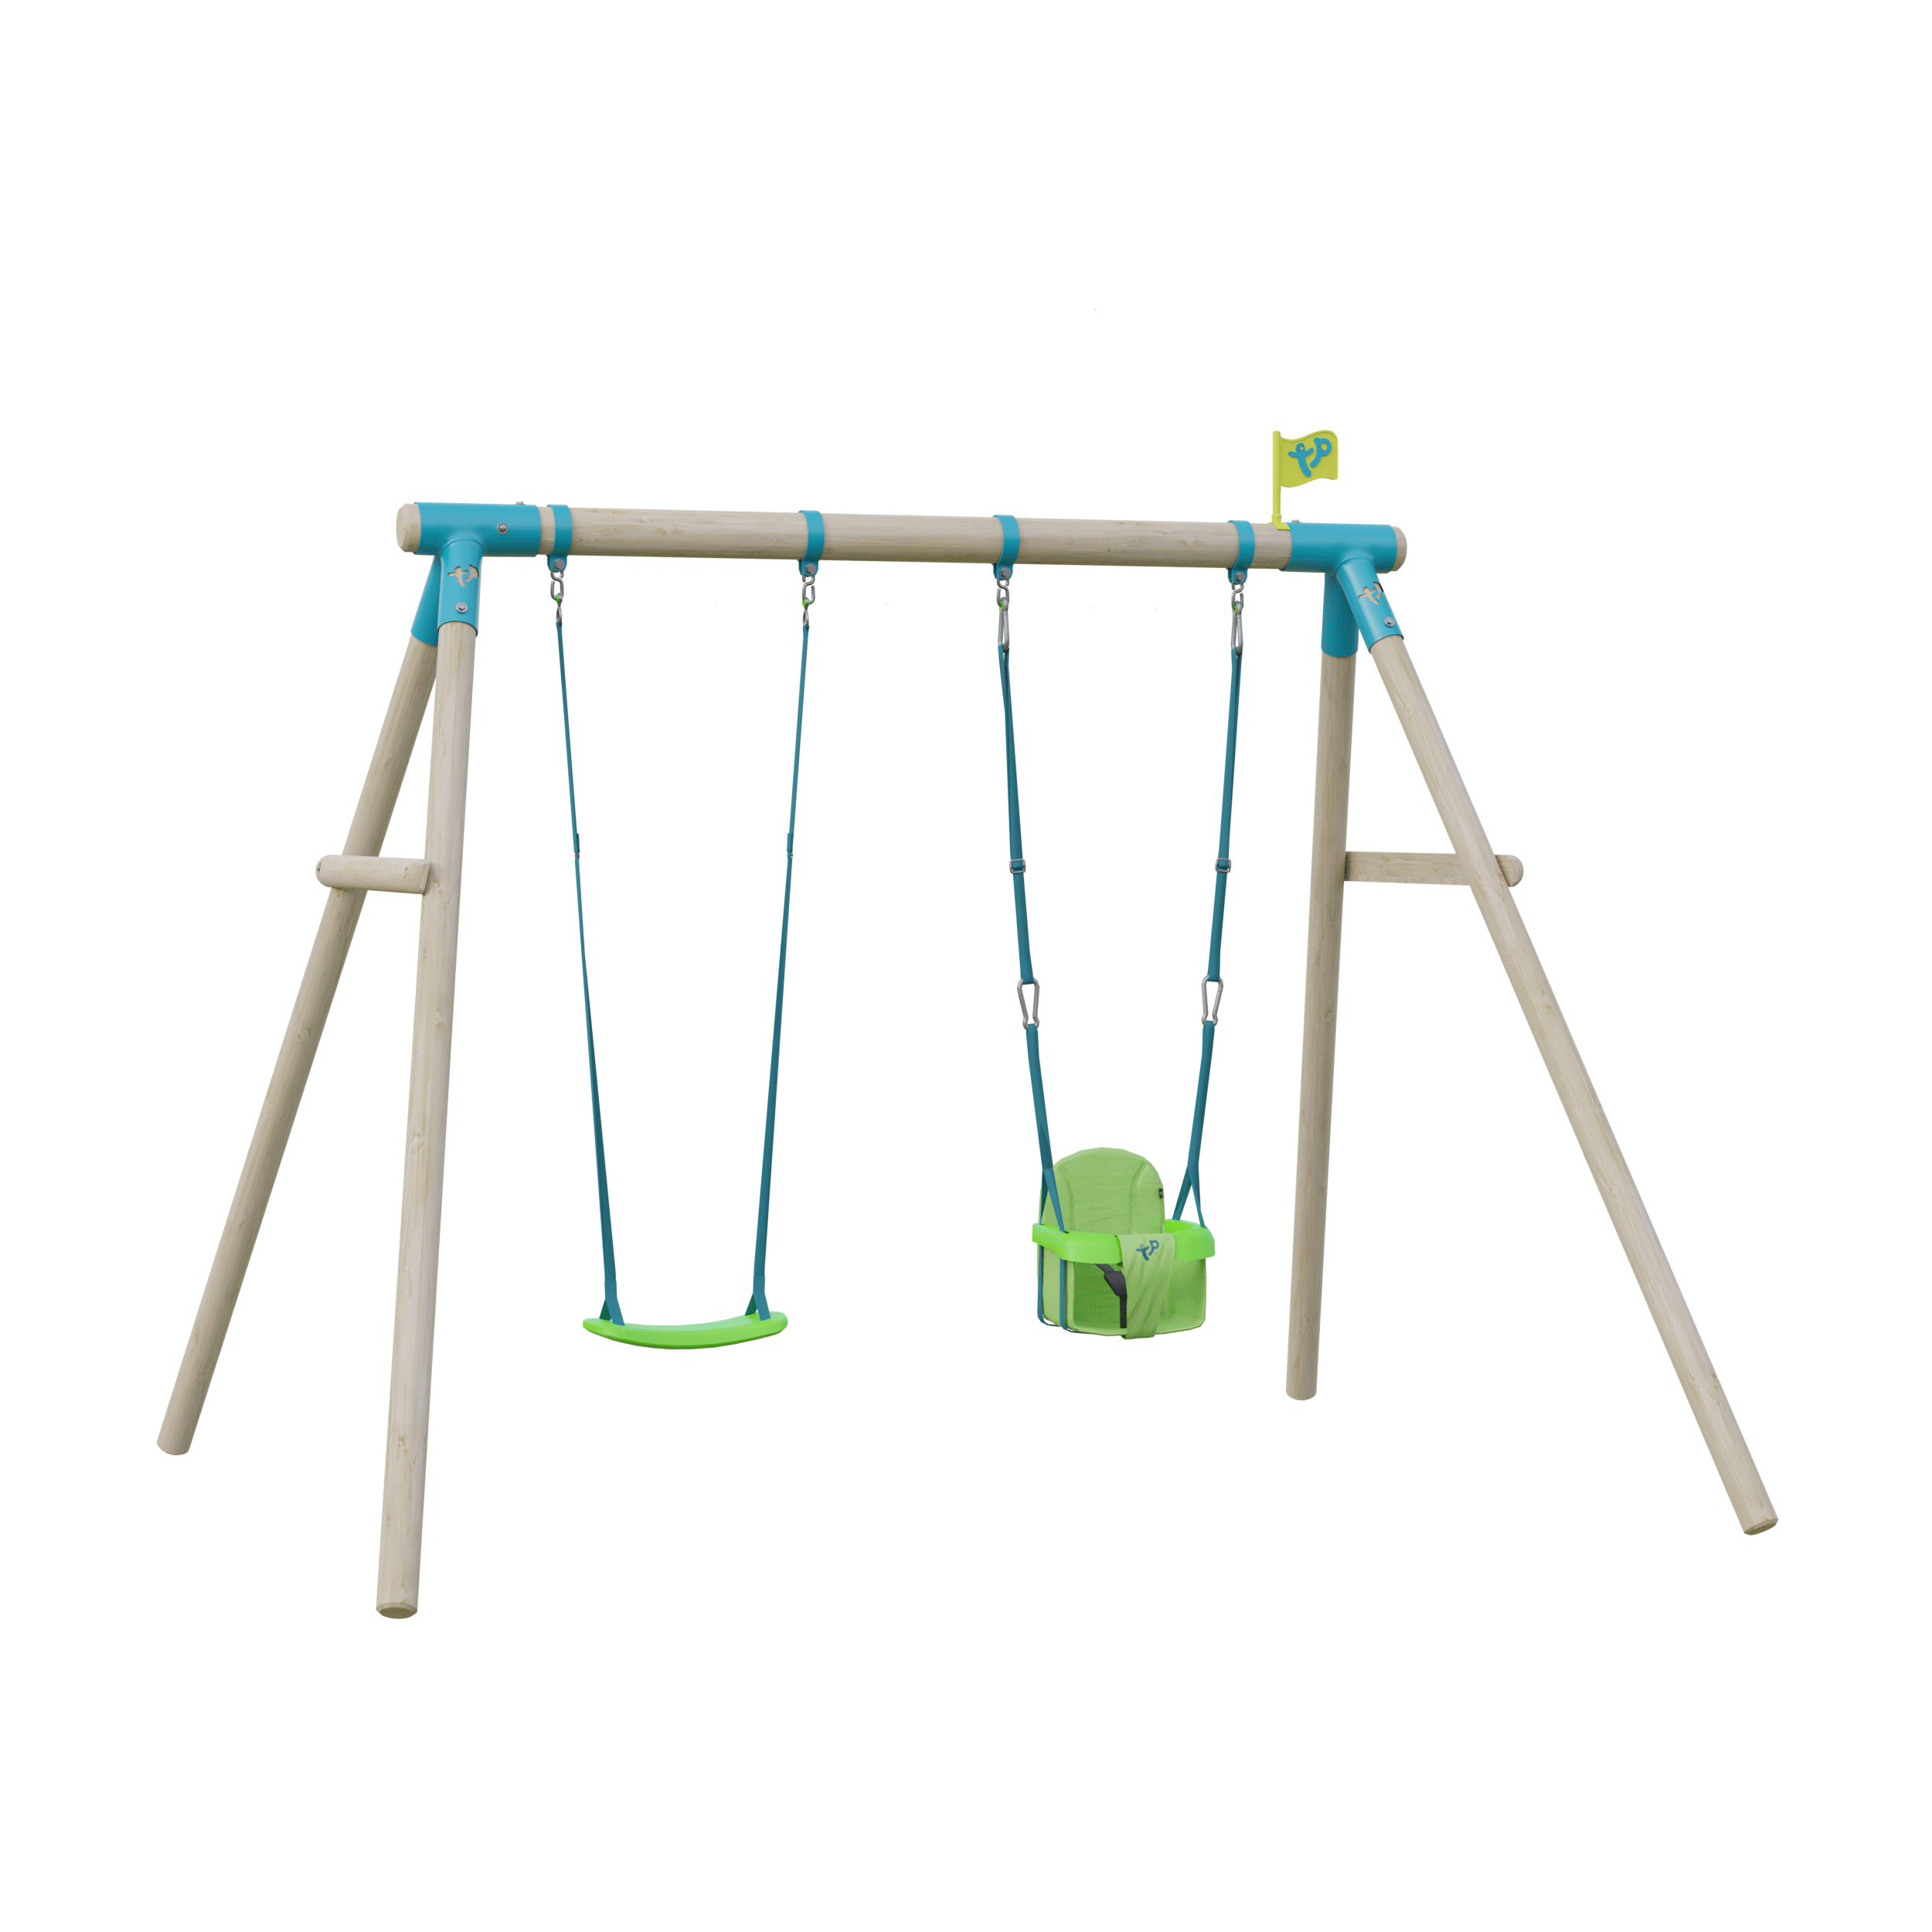 TP Knightswood Compact Wooden Double Swing Set - Builder - FSC<sup>®</sup> certified